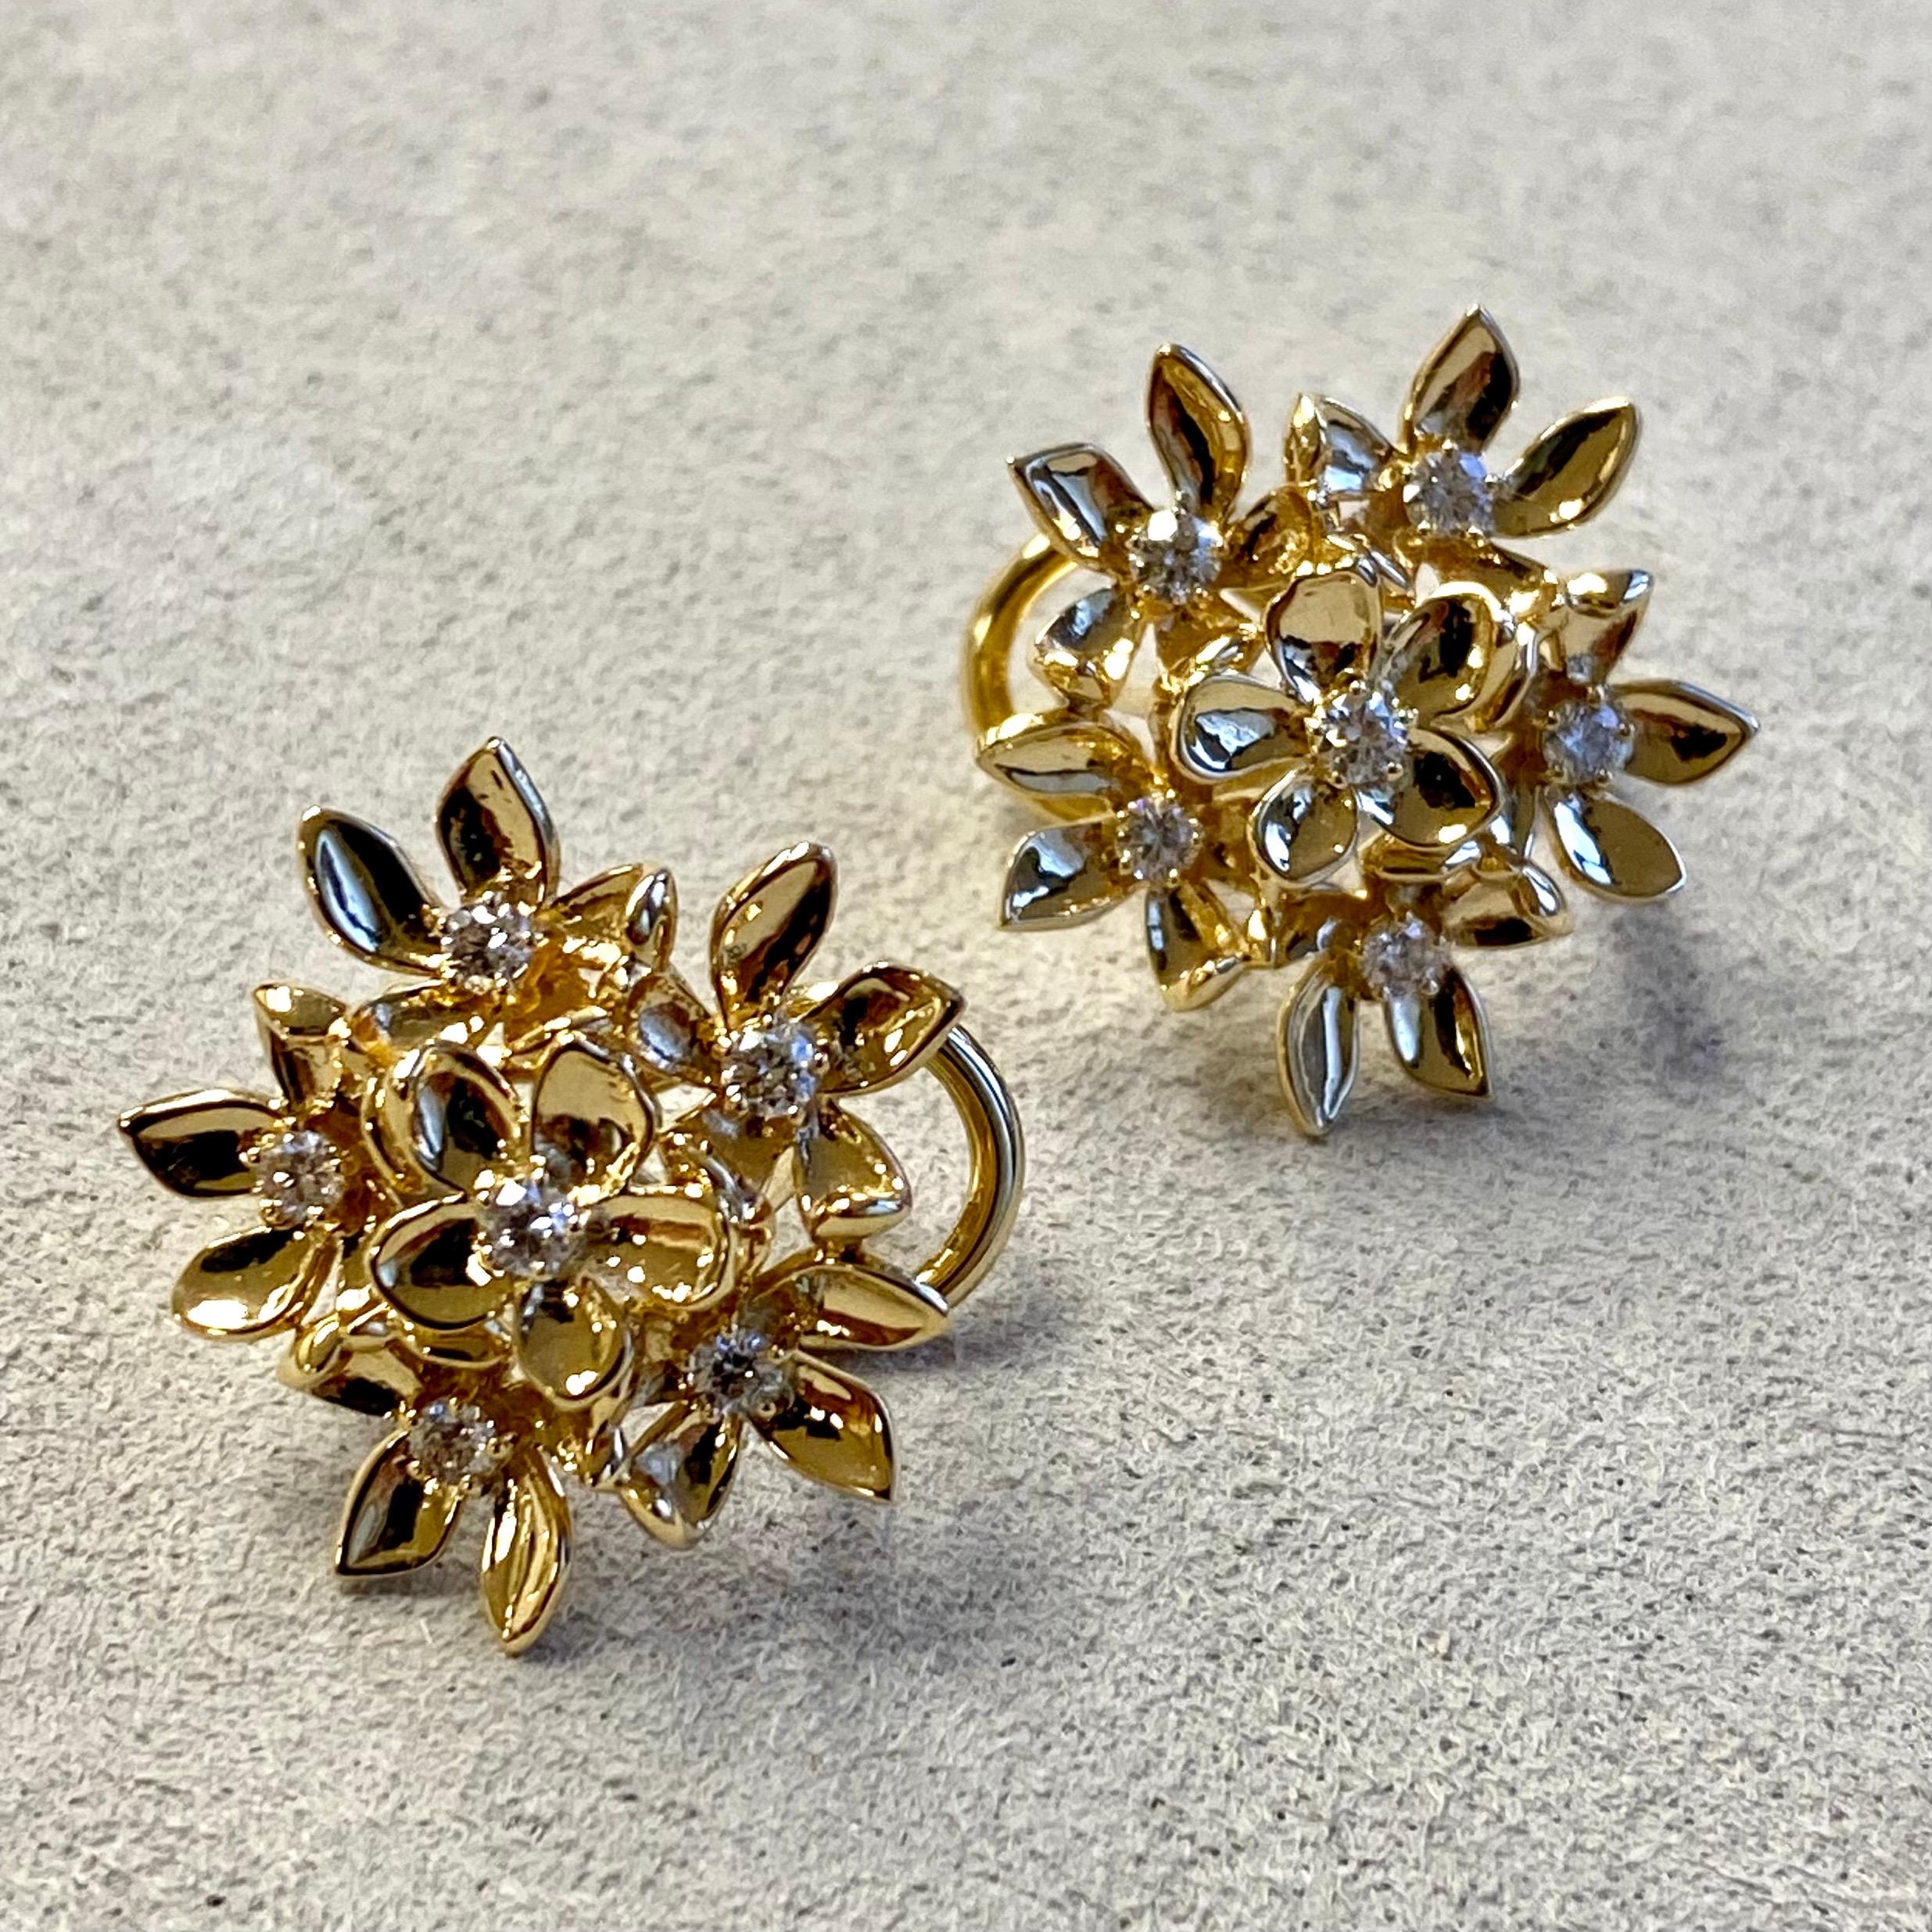 Created in 18 karat yellow gold
Diamonds 0.35 carat approx.
Omega clip-backs & posts
Limited Edition

Adorn yourself with these breathtaking Candy Blue Topaz and Moon Quartz earrings, handcrafted in 18 karat yellow gold and encrusted with 0.35